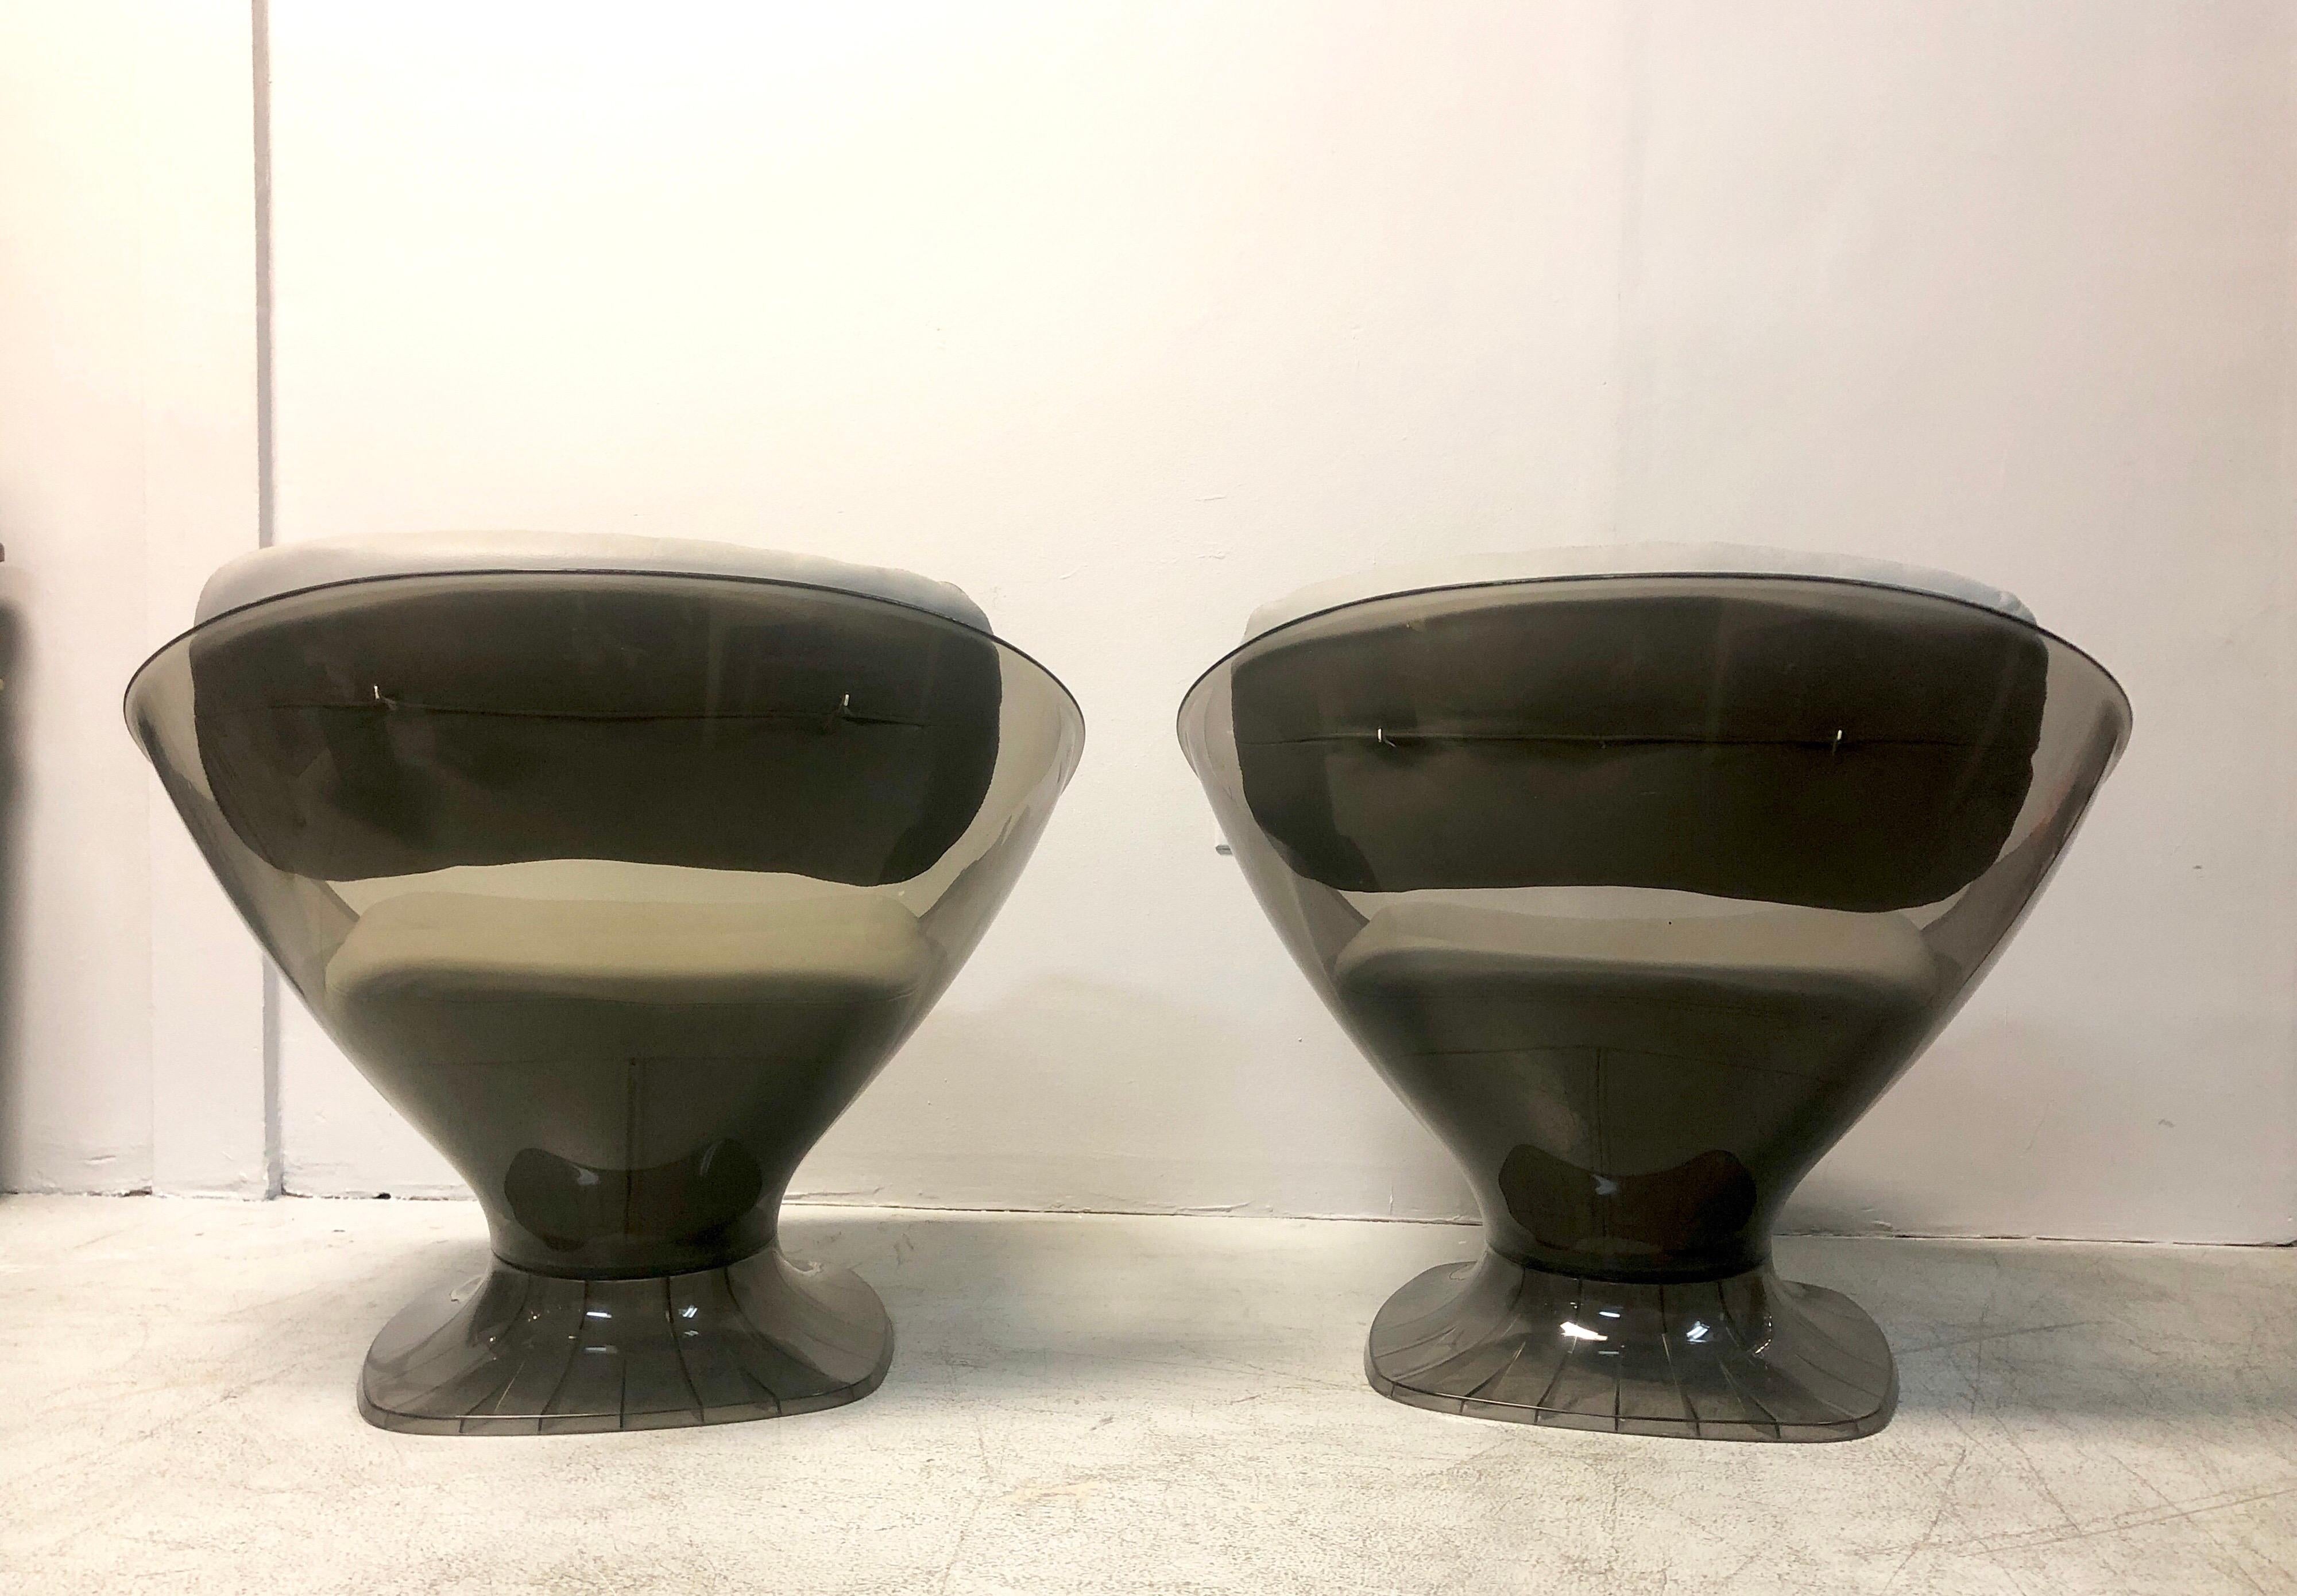 Raphael Raffel Pod Bronze Acrylic Pair of Chairs with Light Gray Leather Seats im Zustand „Gut“ in Miami, FL